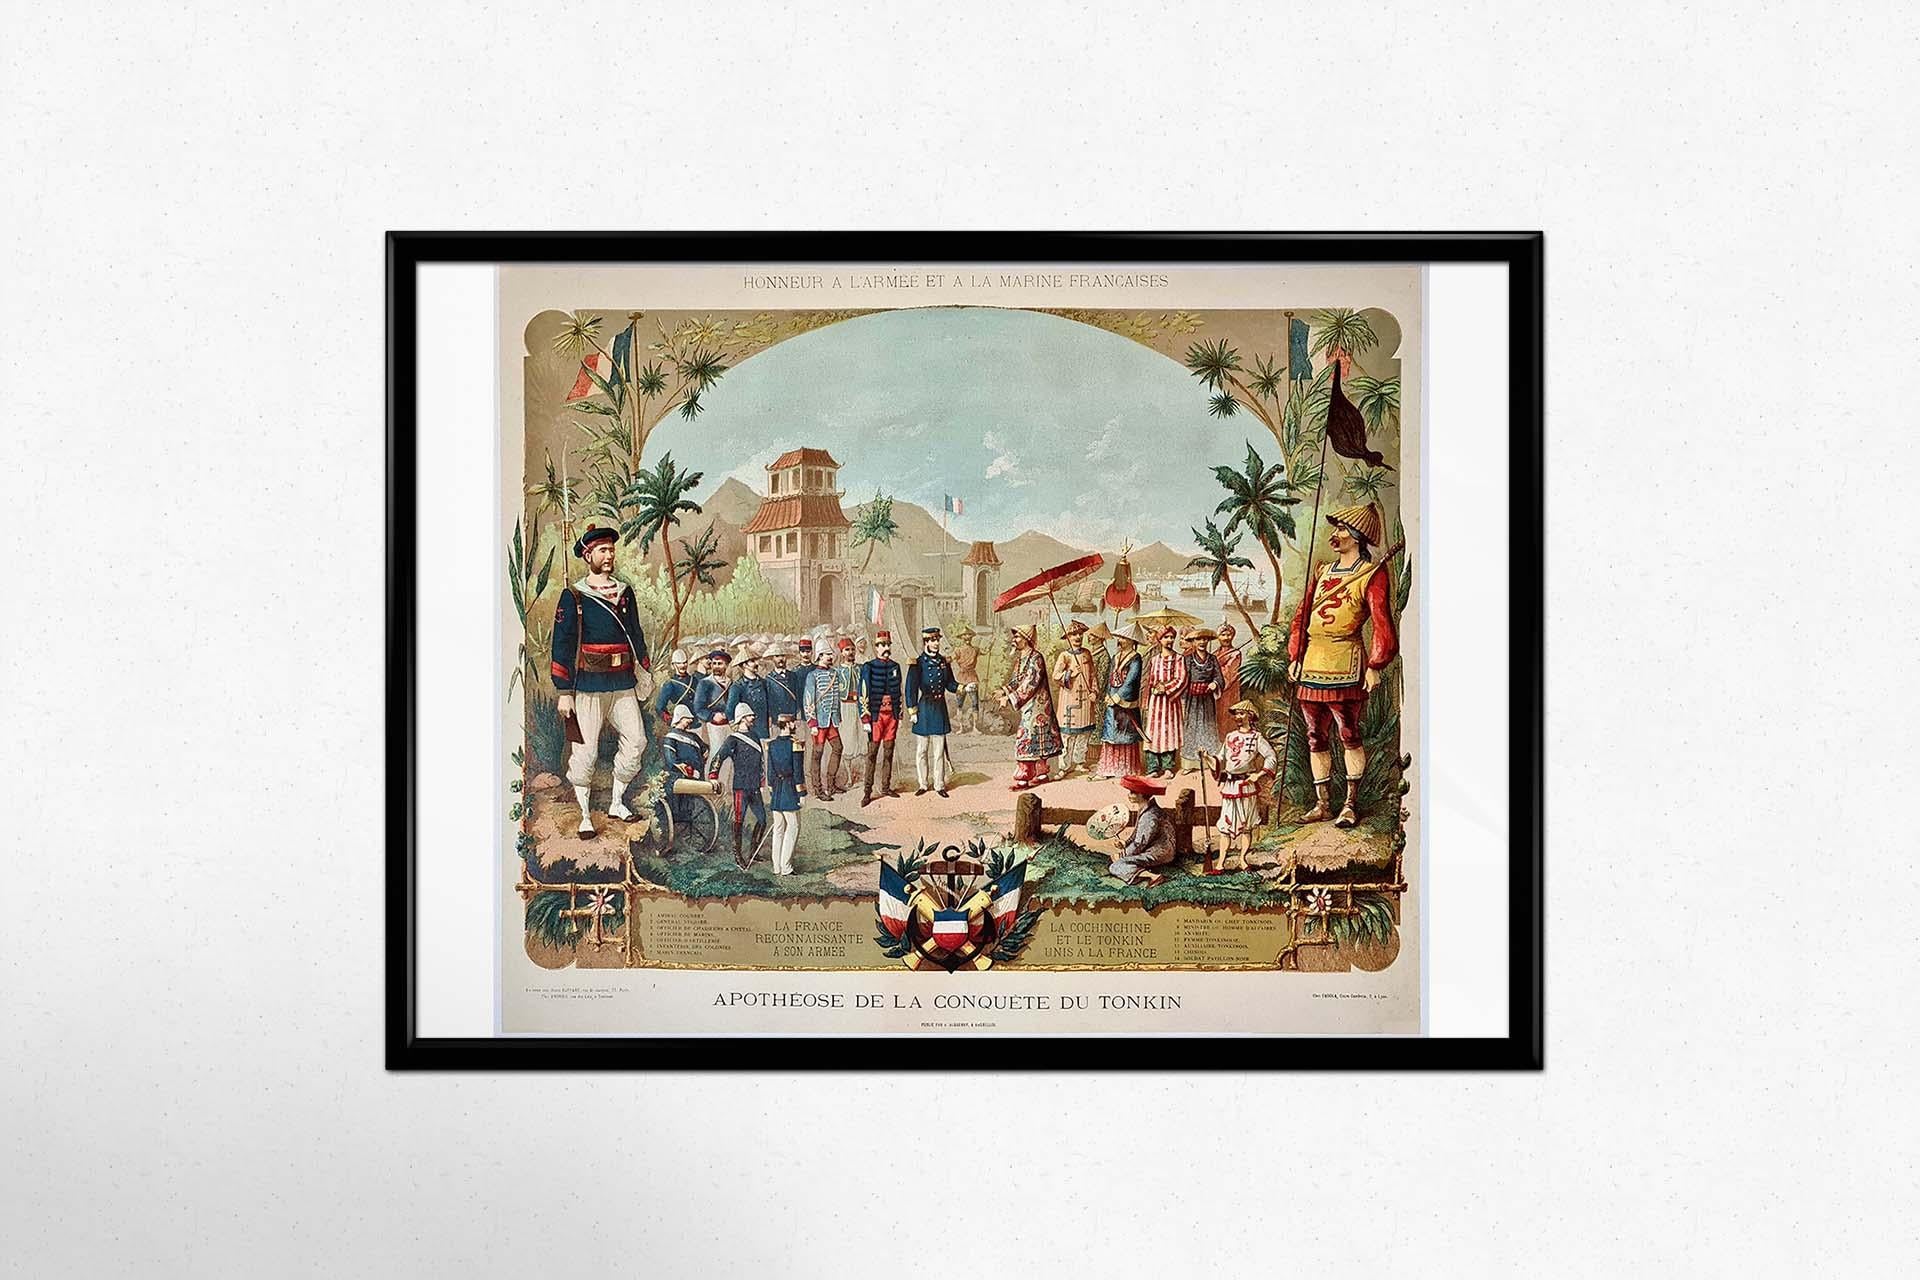 Poster from the end of the 19th century on the conquest of Tonkin. Honor to the French army and navy, France grateful to its army, Cochinchina and Tonkin united to France.

Military - Asia

China, Honor to the French Army and Marine -